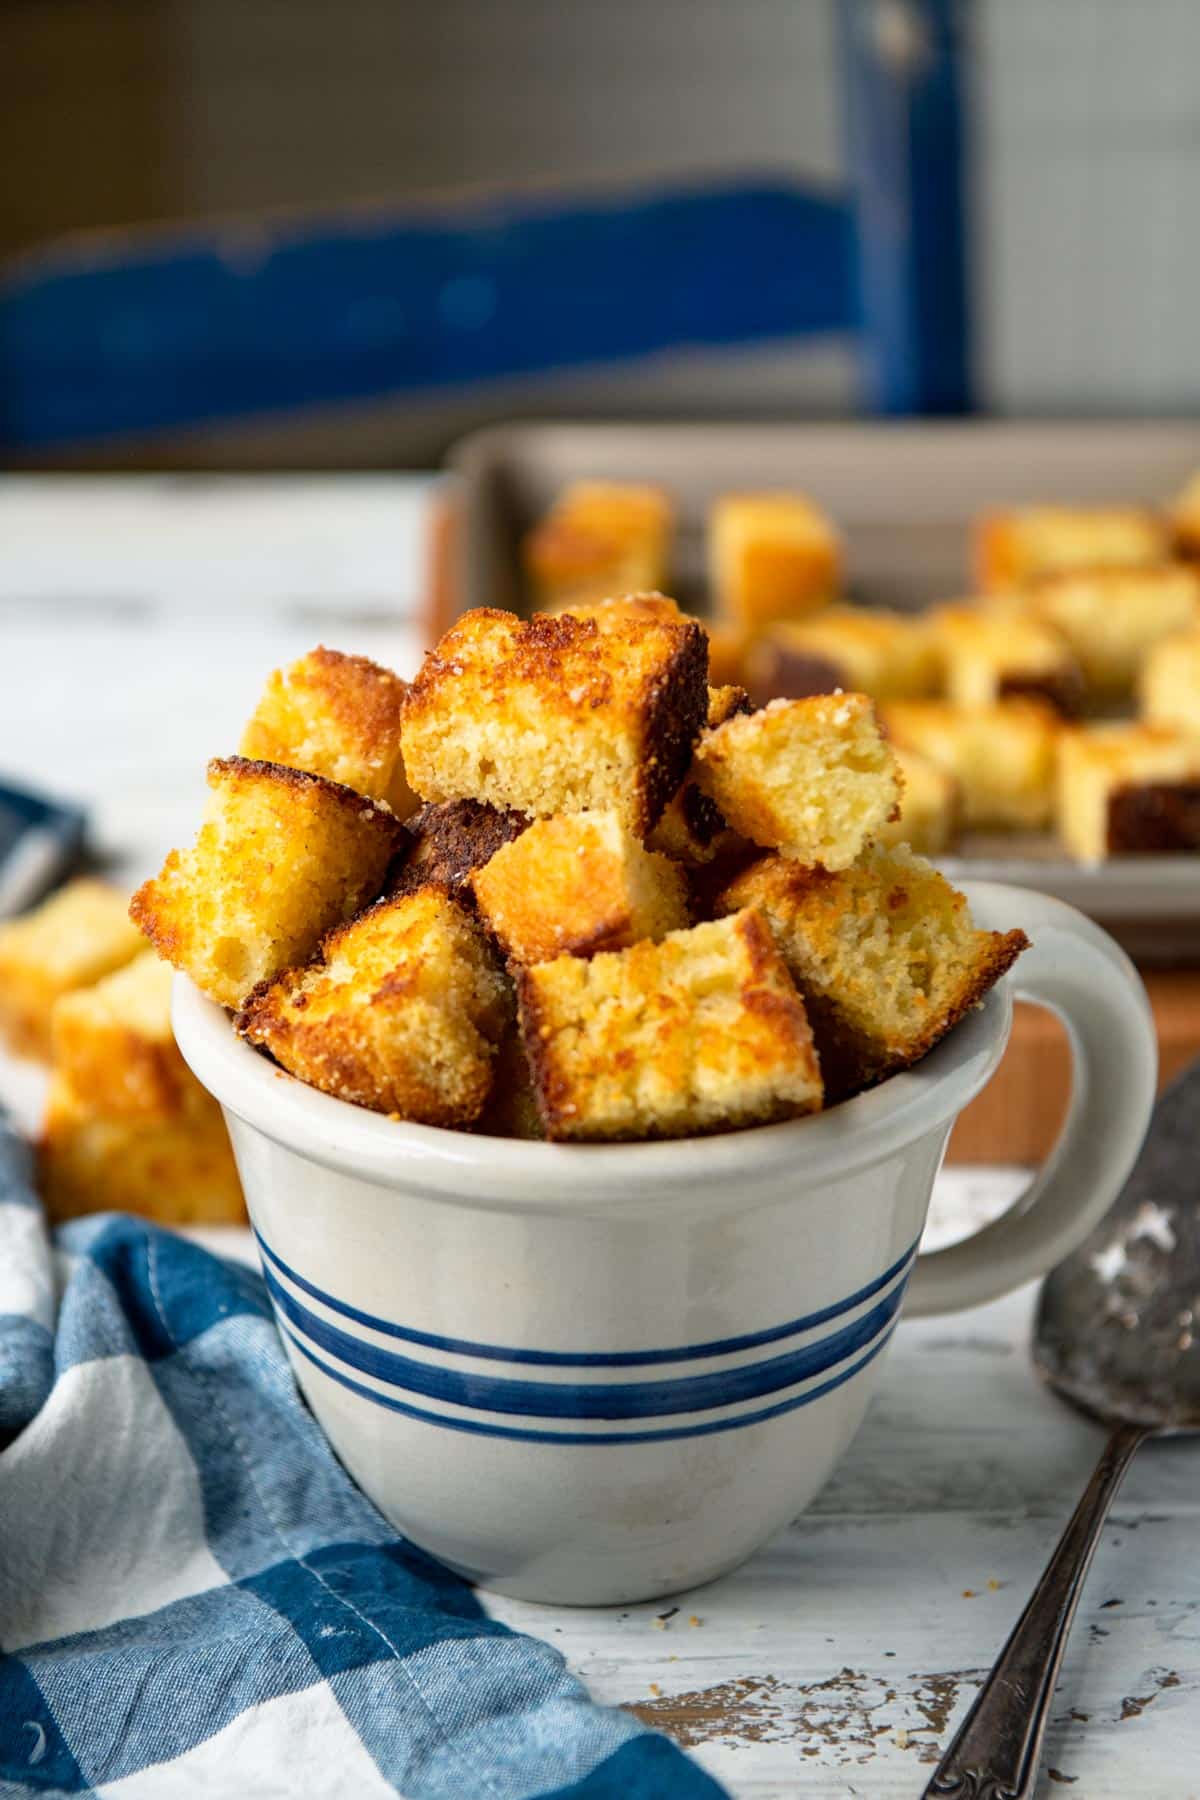 Homemade cornbread croutons stacked in a blue and white mug on a table.